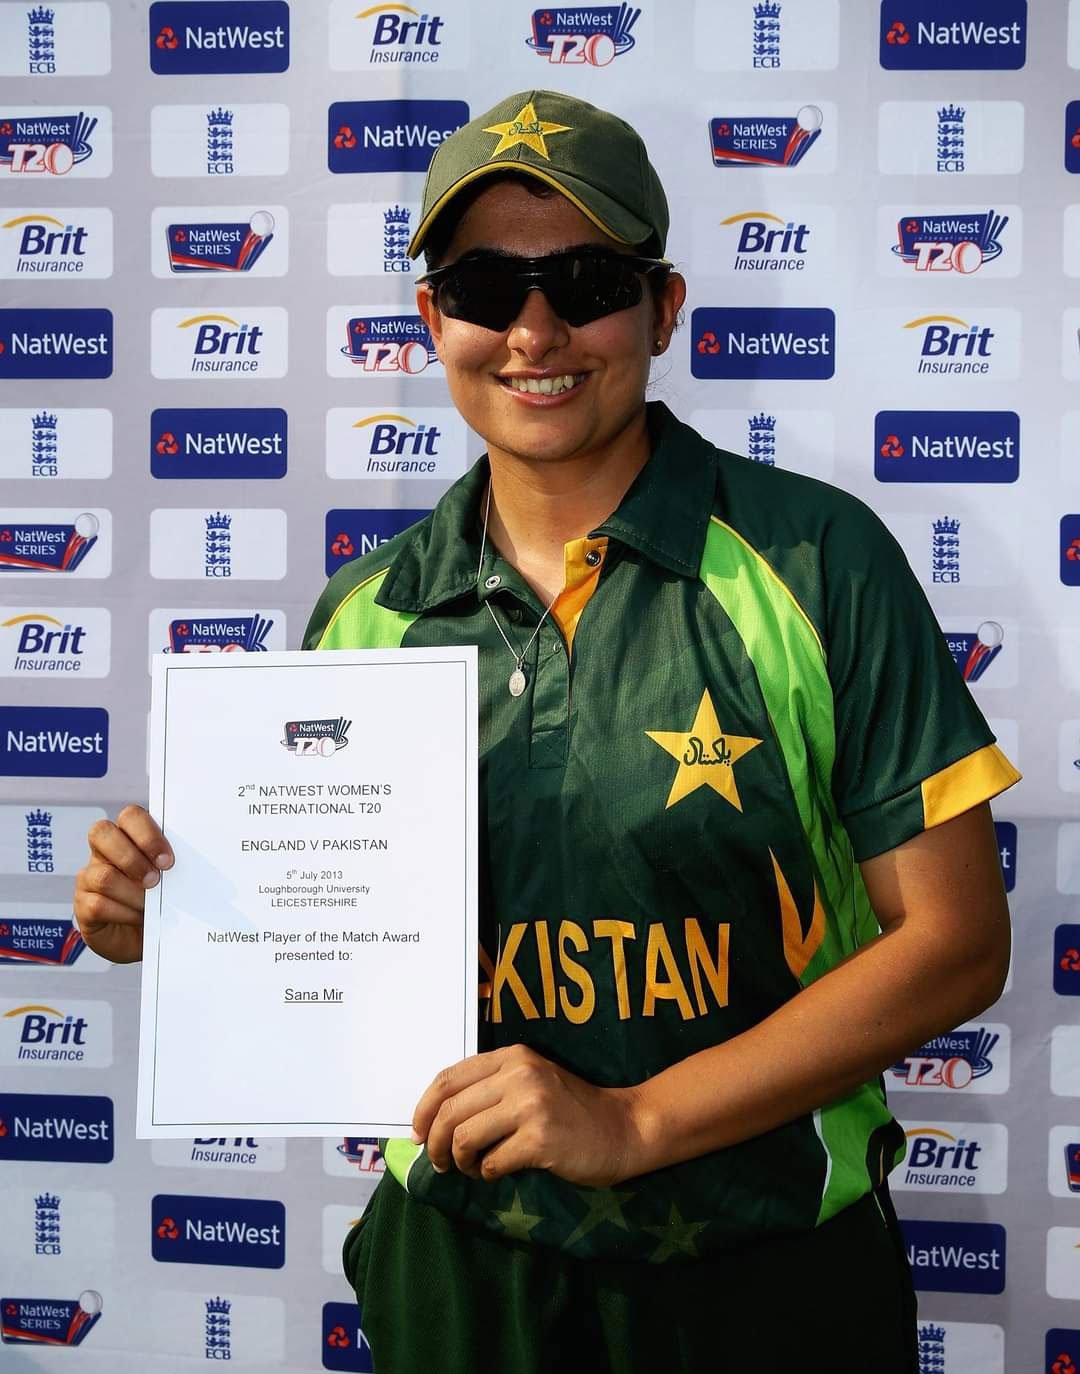 Former Pakistan captain Sana Mir poses after receiving a Player of the Match Award during the 2nd Natwest Womens International T20 in July 2013. — Twitter/@mir_sana05